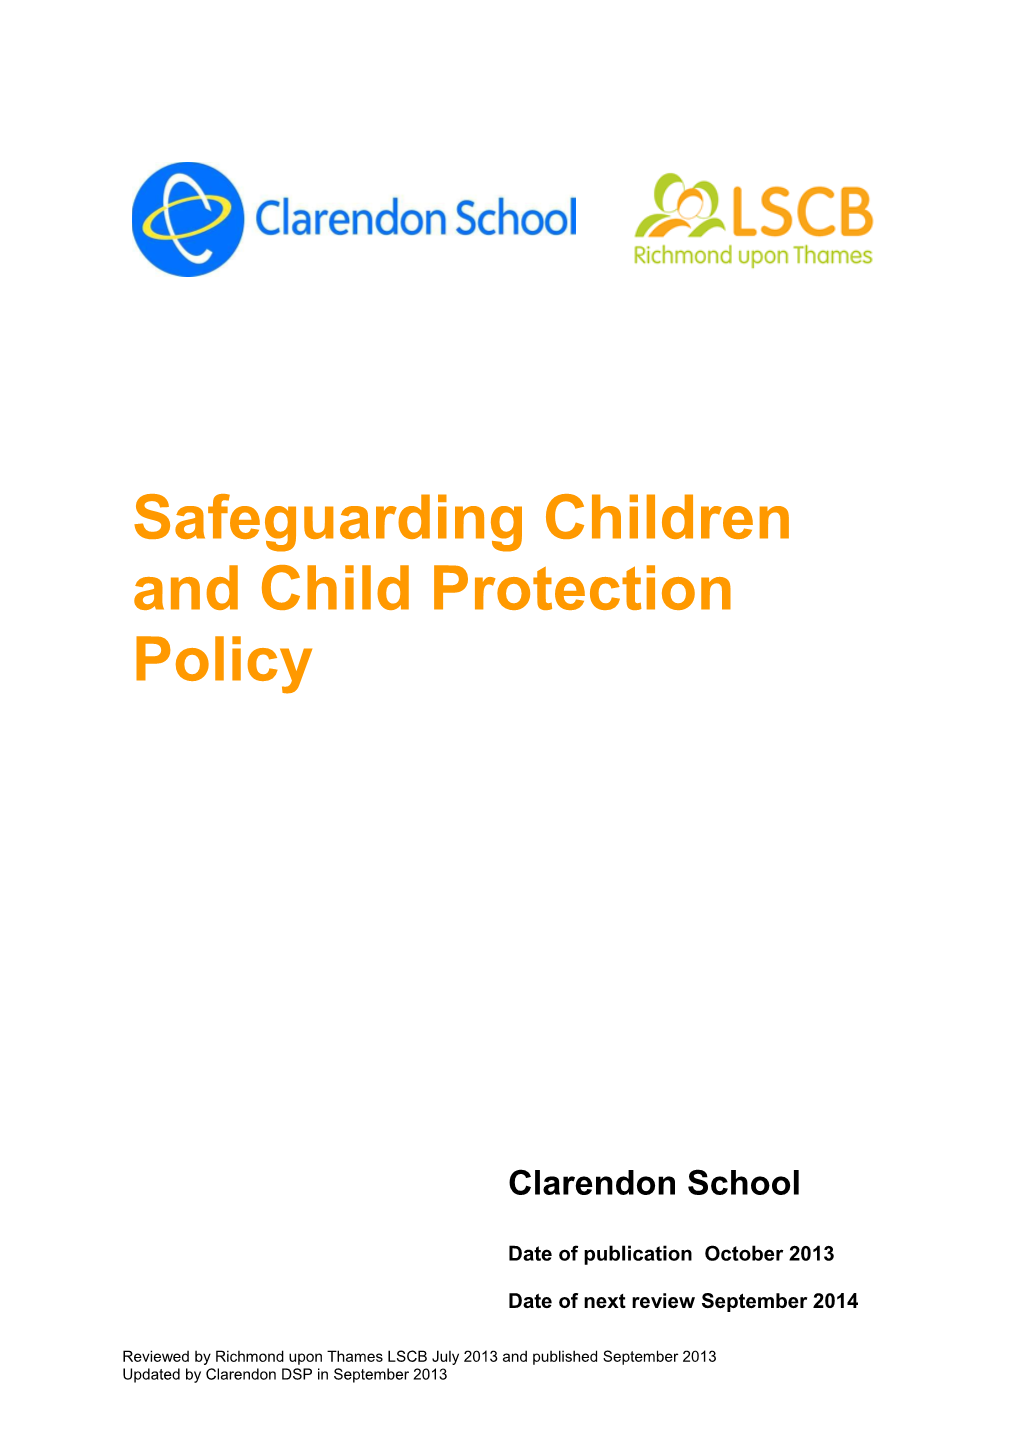 Model School Safeguarding and Child Protection Policy